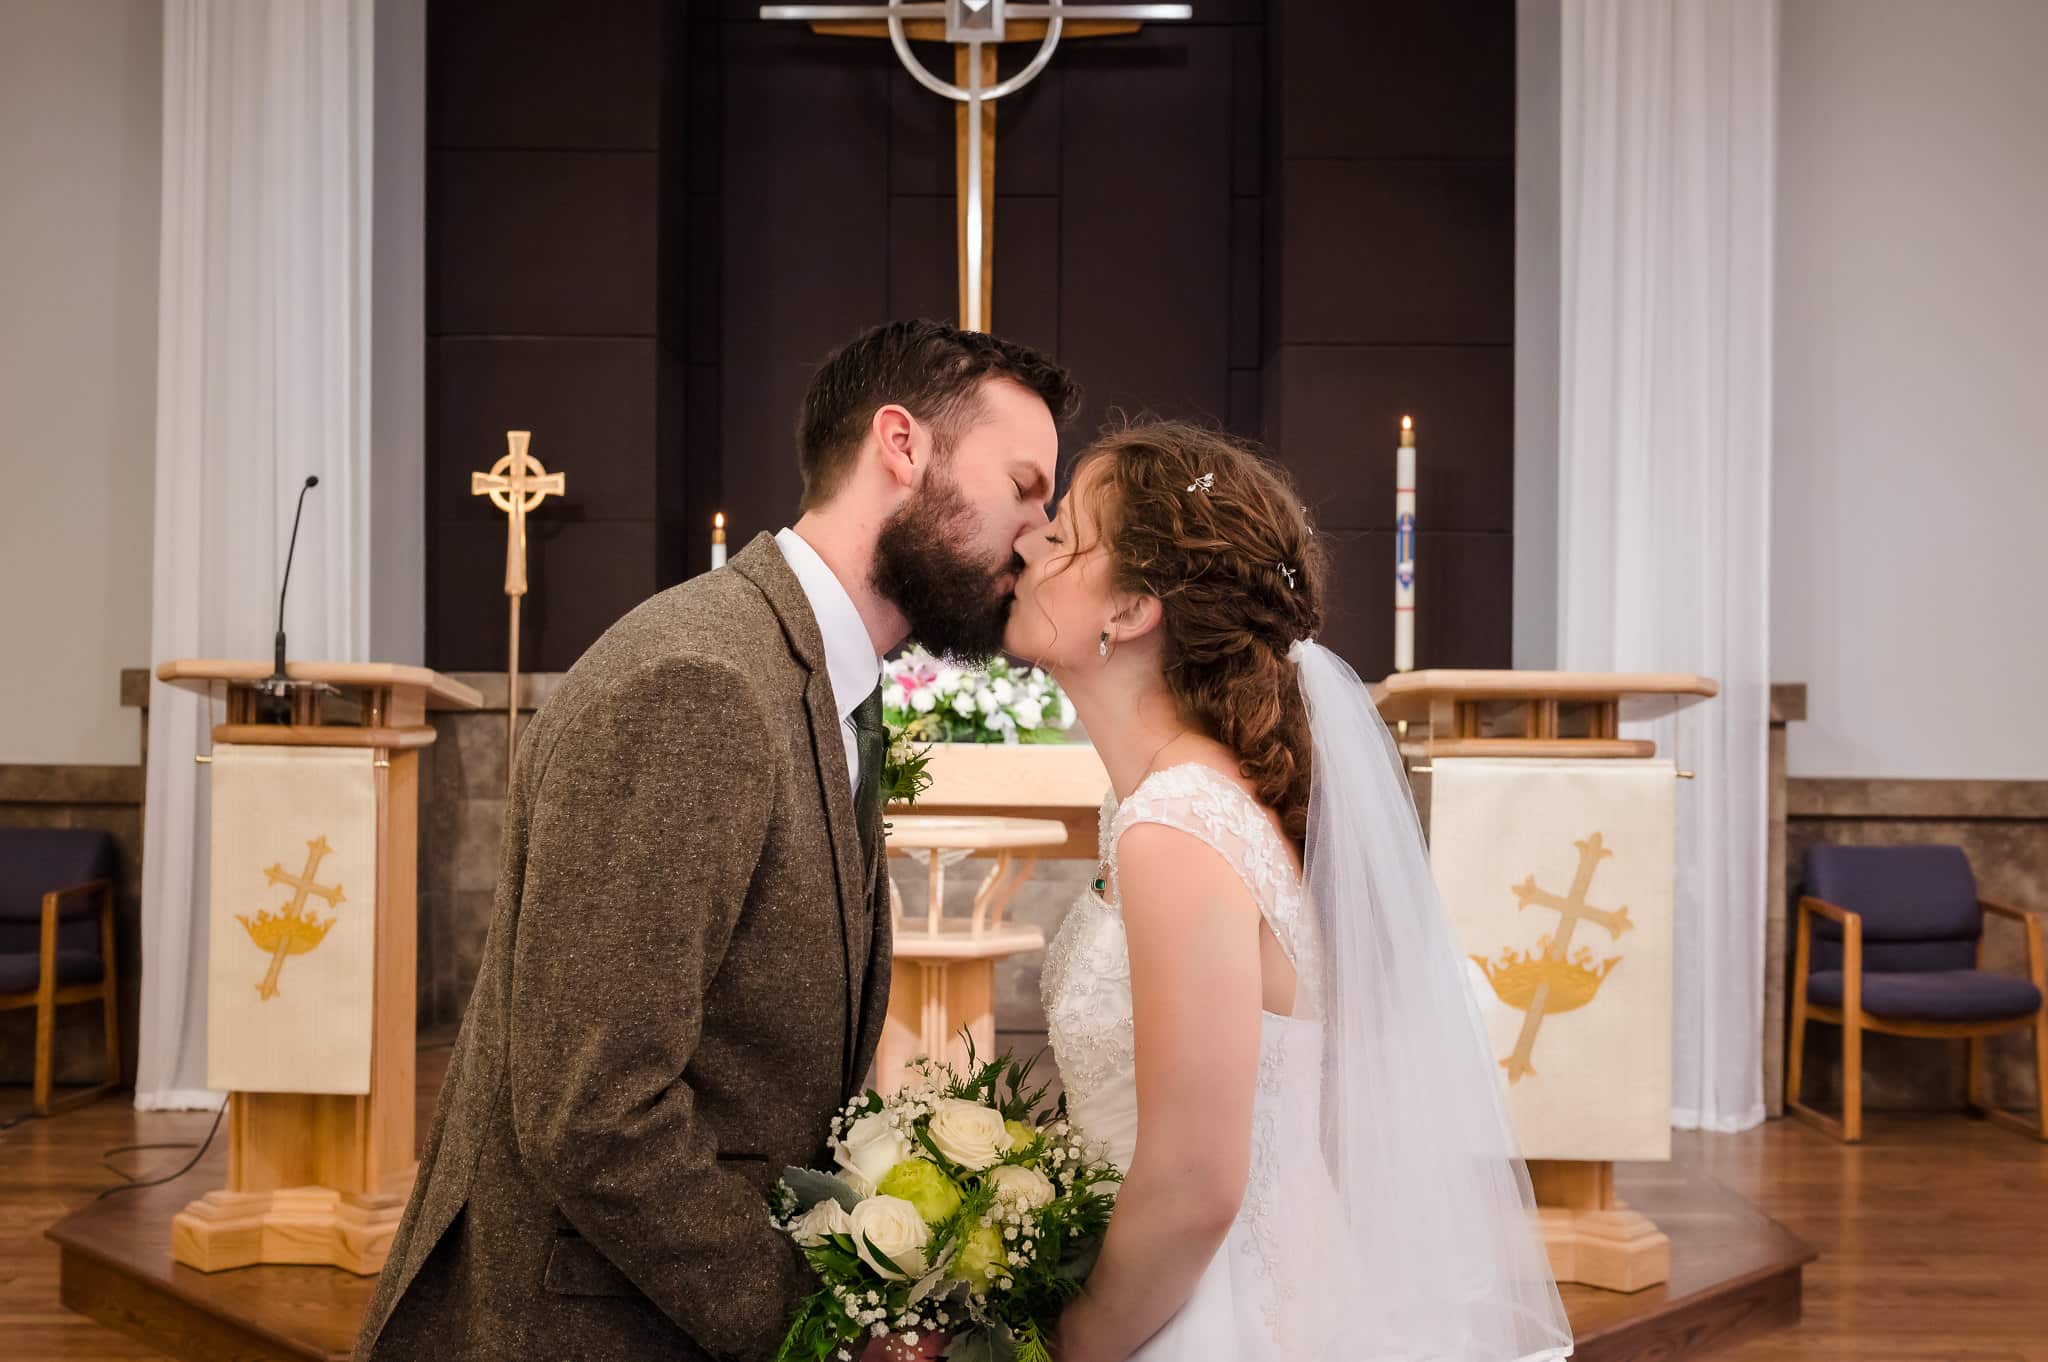 The bride and groom lean over the bridal bouquet and kiss at the altar of the church.